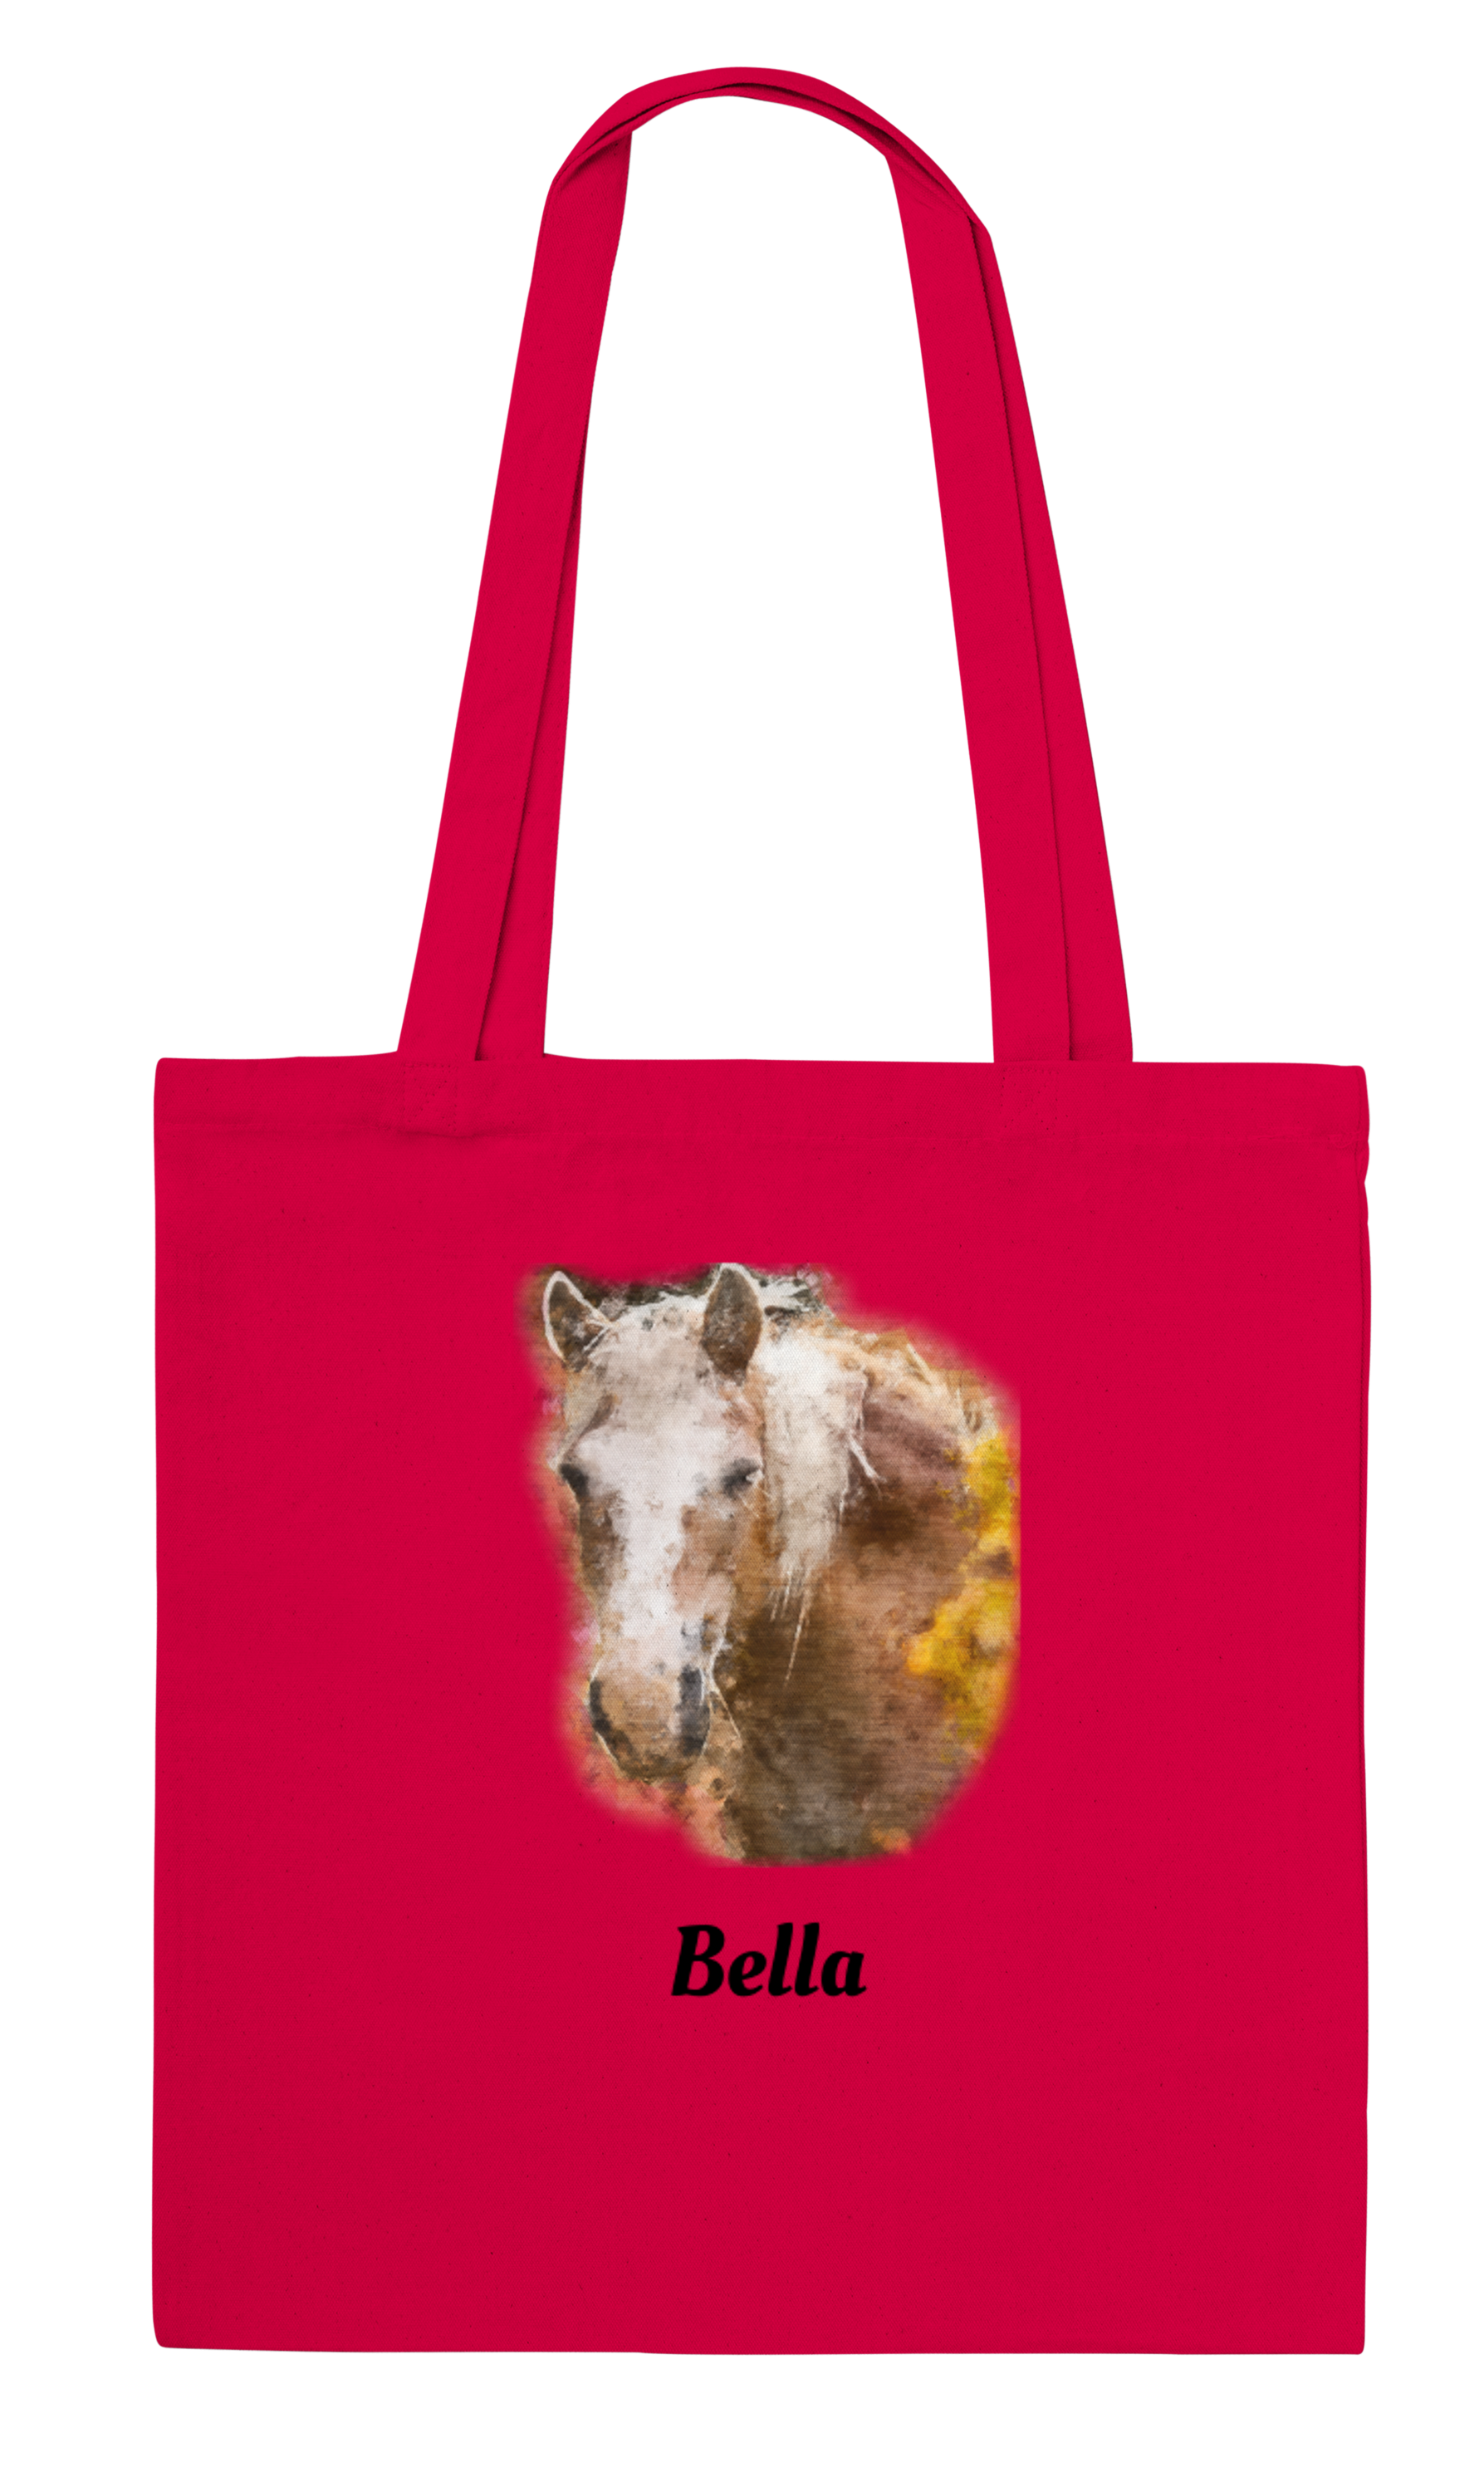 Hand Drawn Horse || Tote Bag - Oil Painting - Personalized; Personalized with your horse